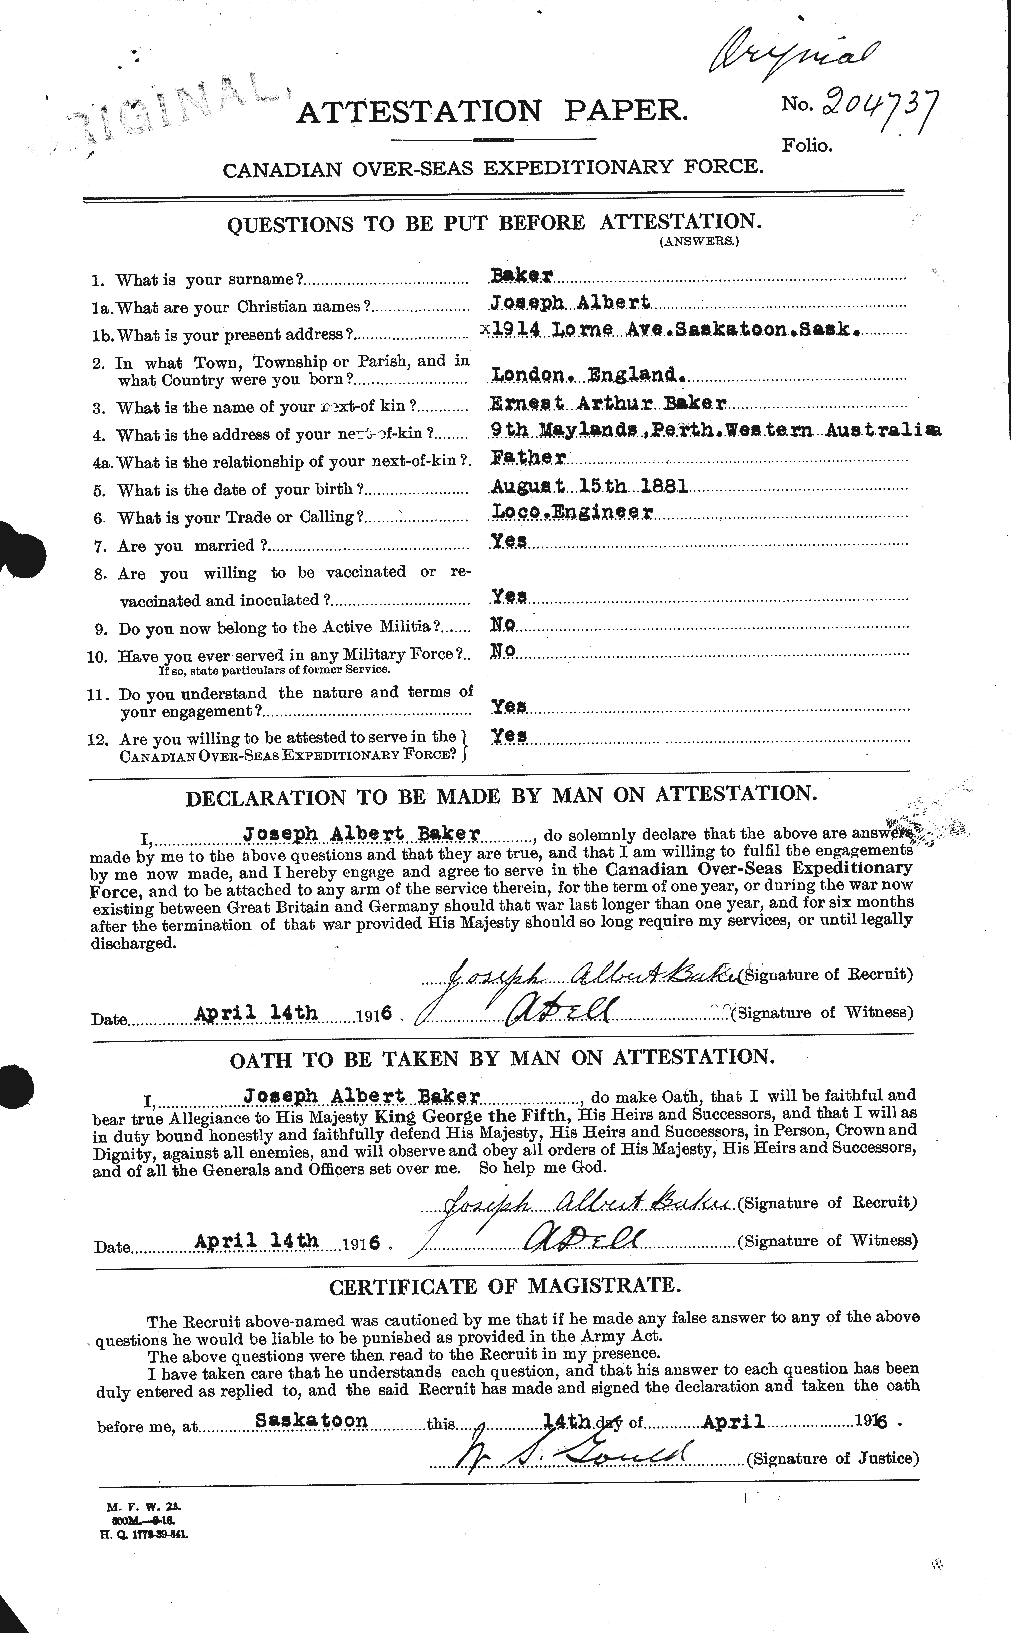 Personnel Records of the First World War - CEF 222360a